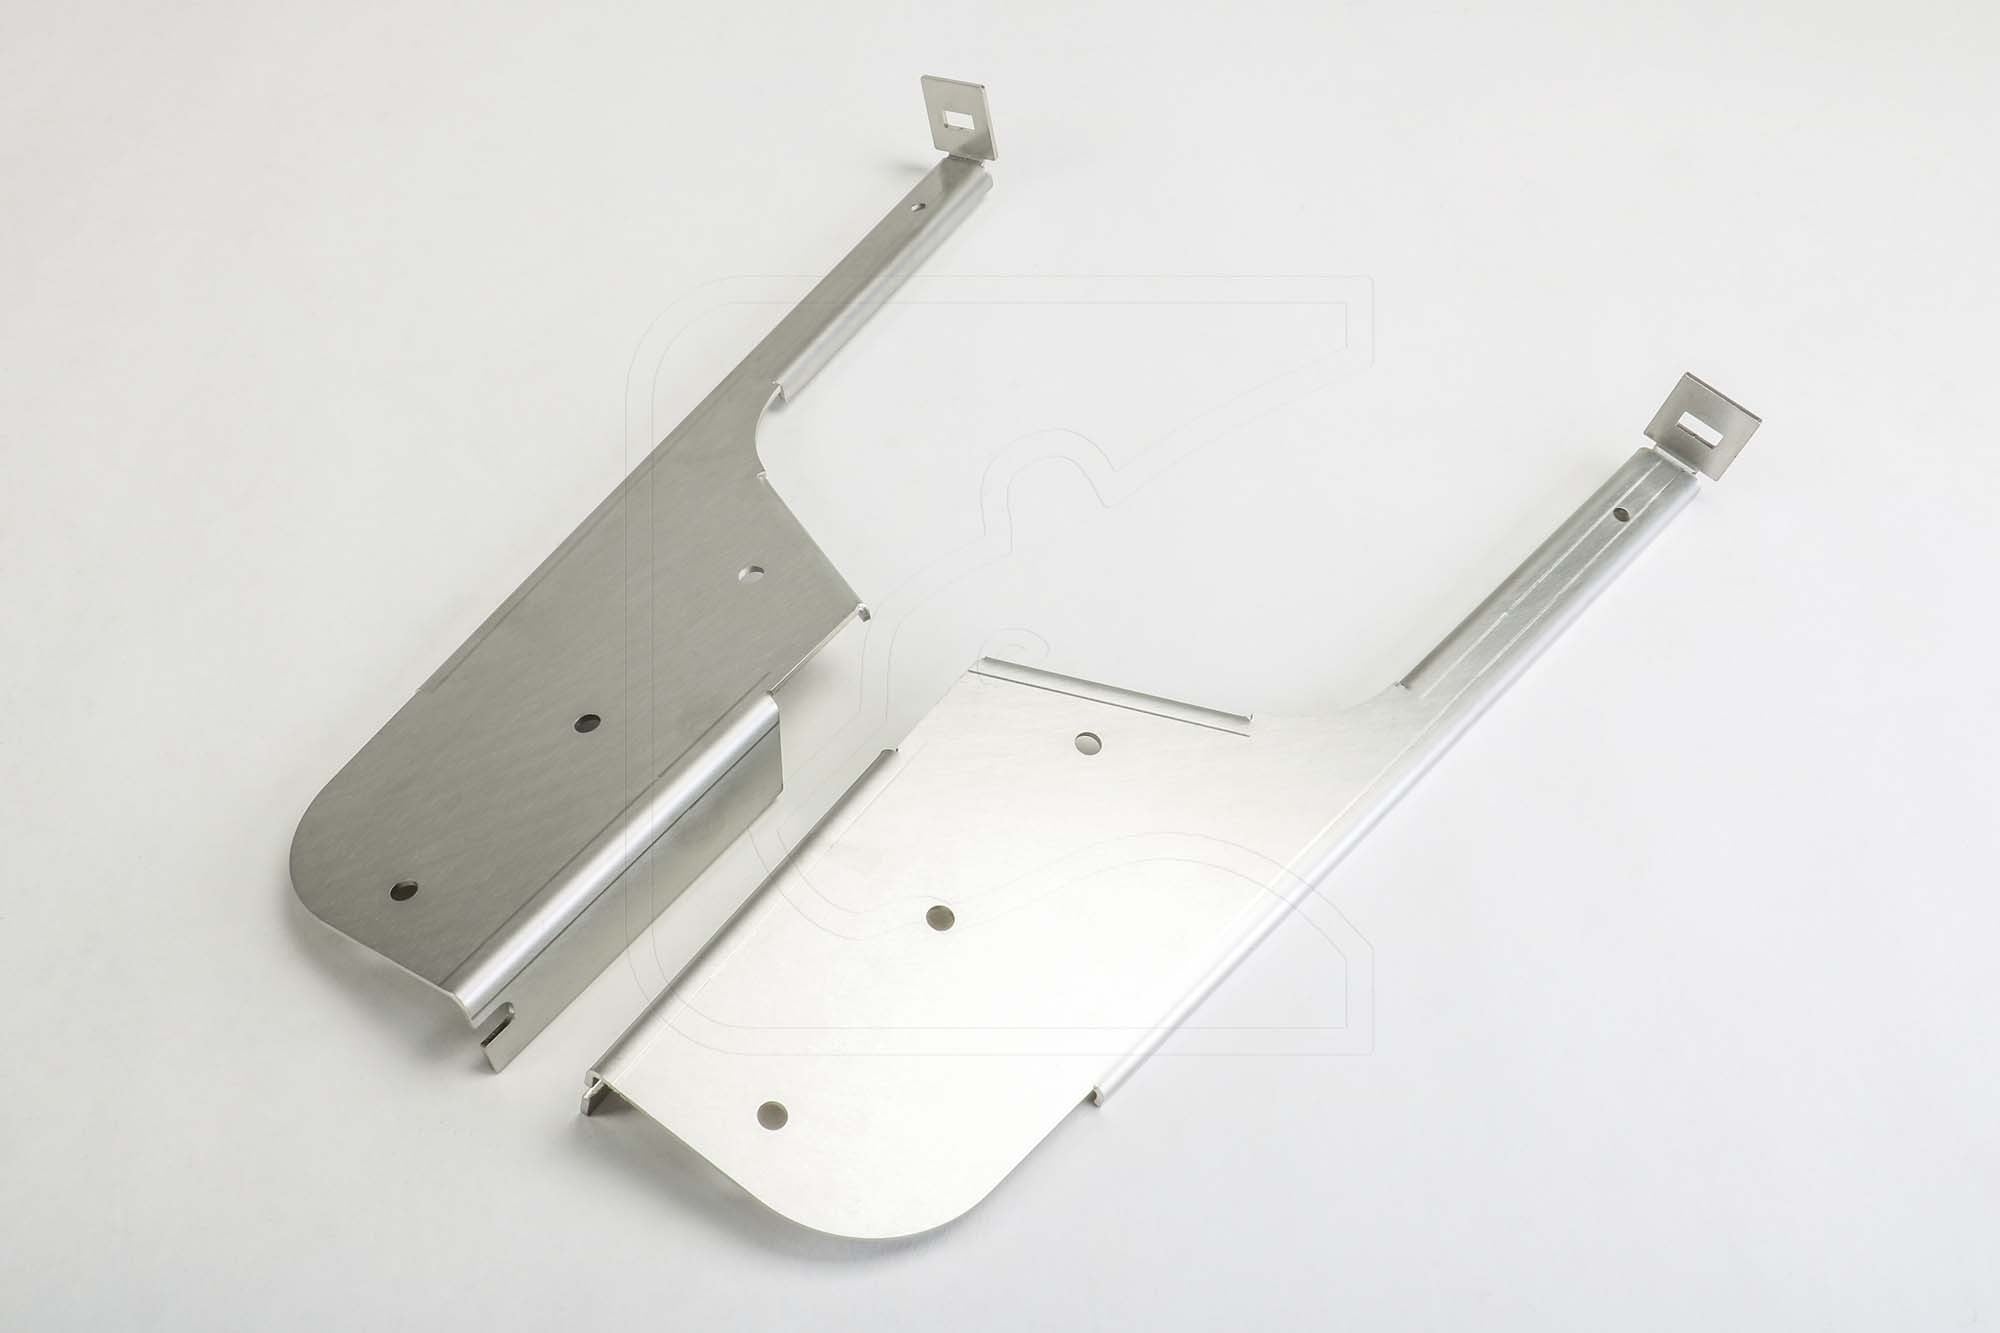 Stainless Steel Mud Flap Mounts/Brackets - for Land Rover Defender 110/130